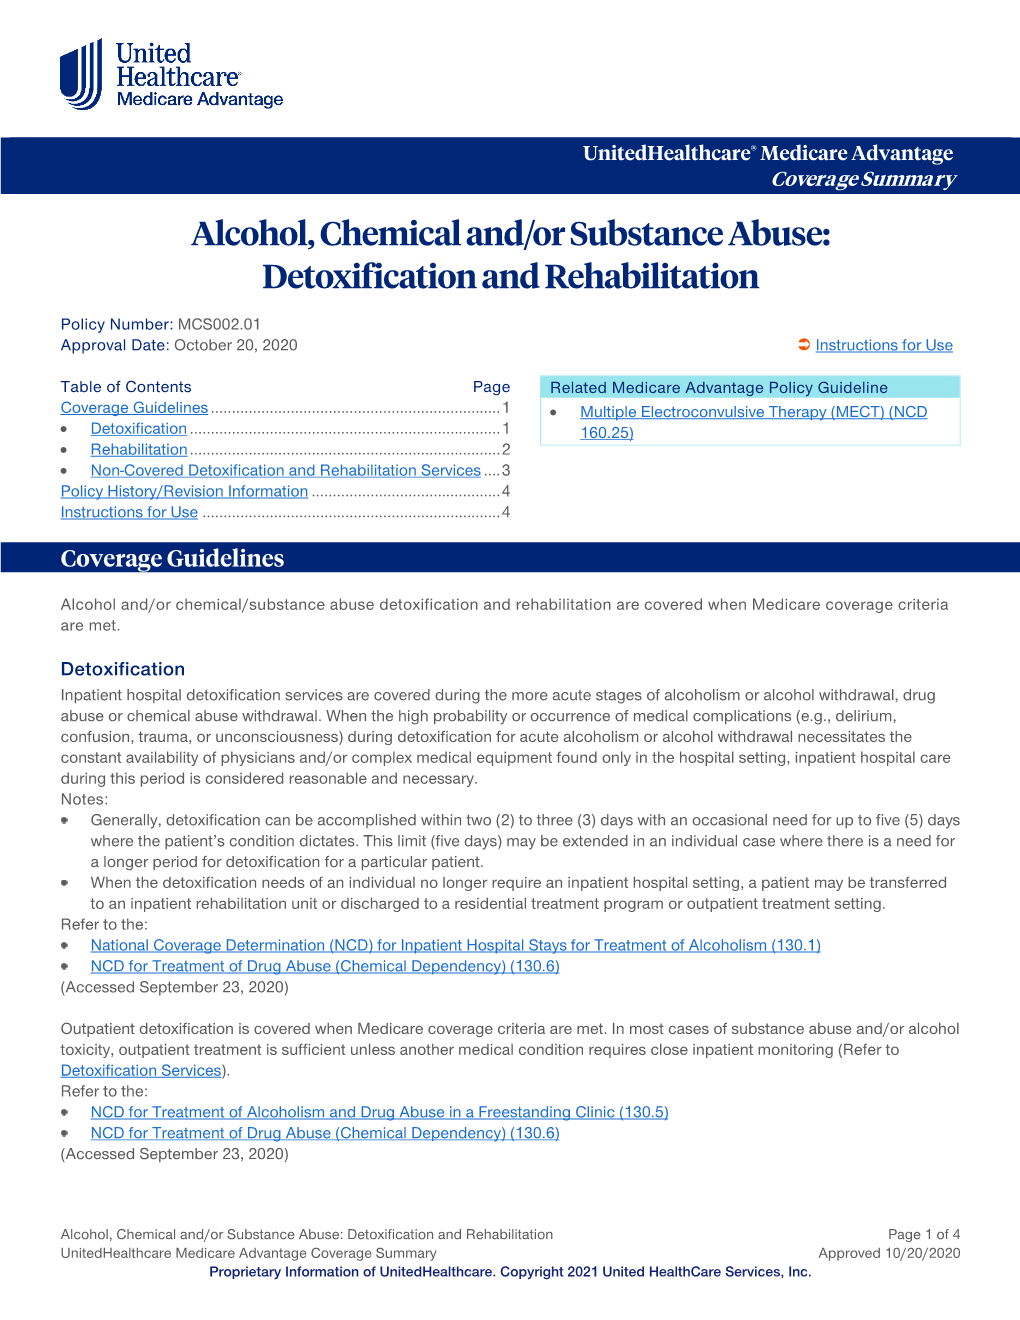 Alcohol, Chemical And/Or Substance Abuse: Detoxification and Rehabilitation